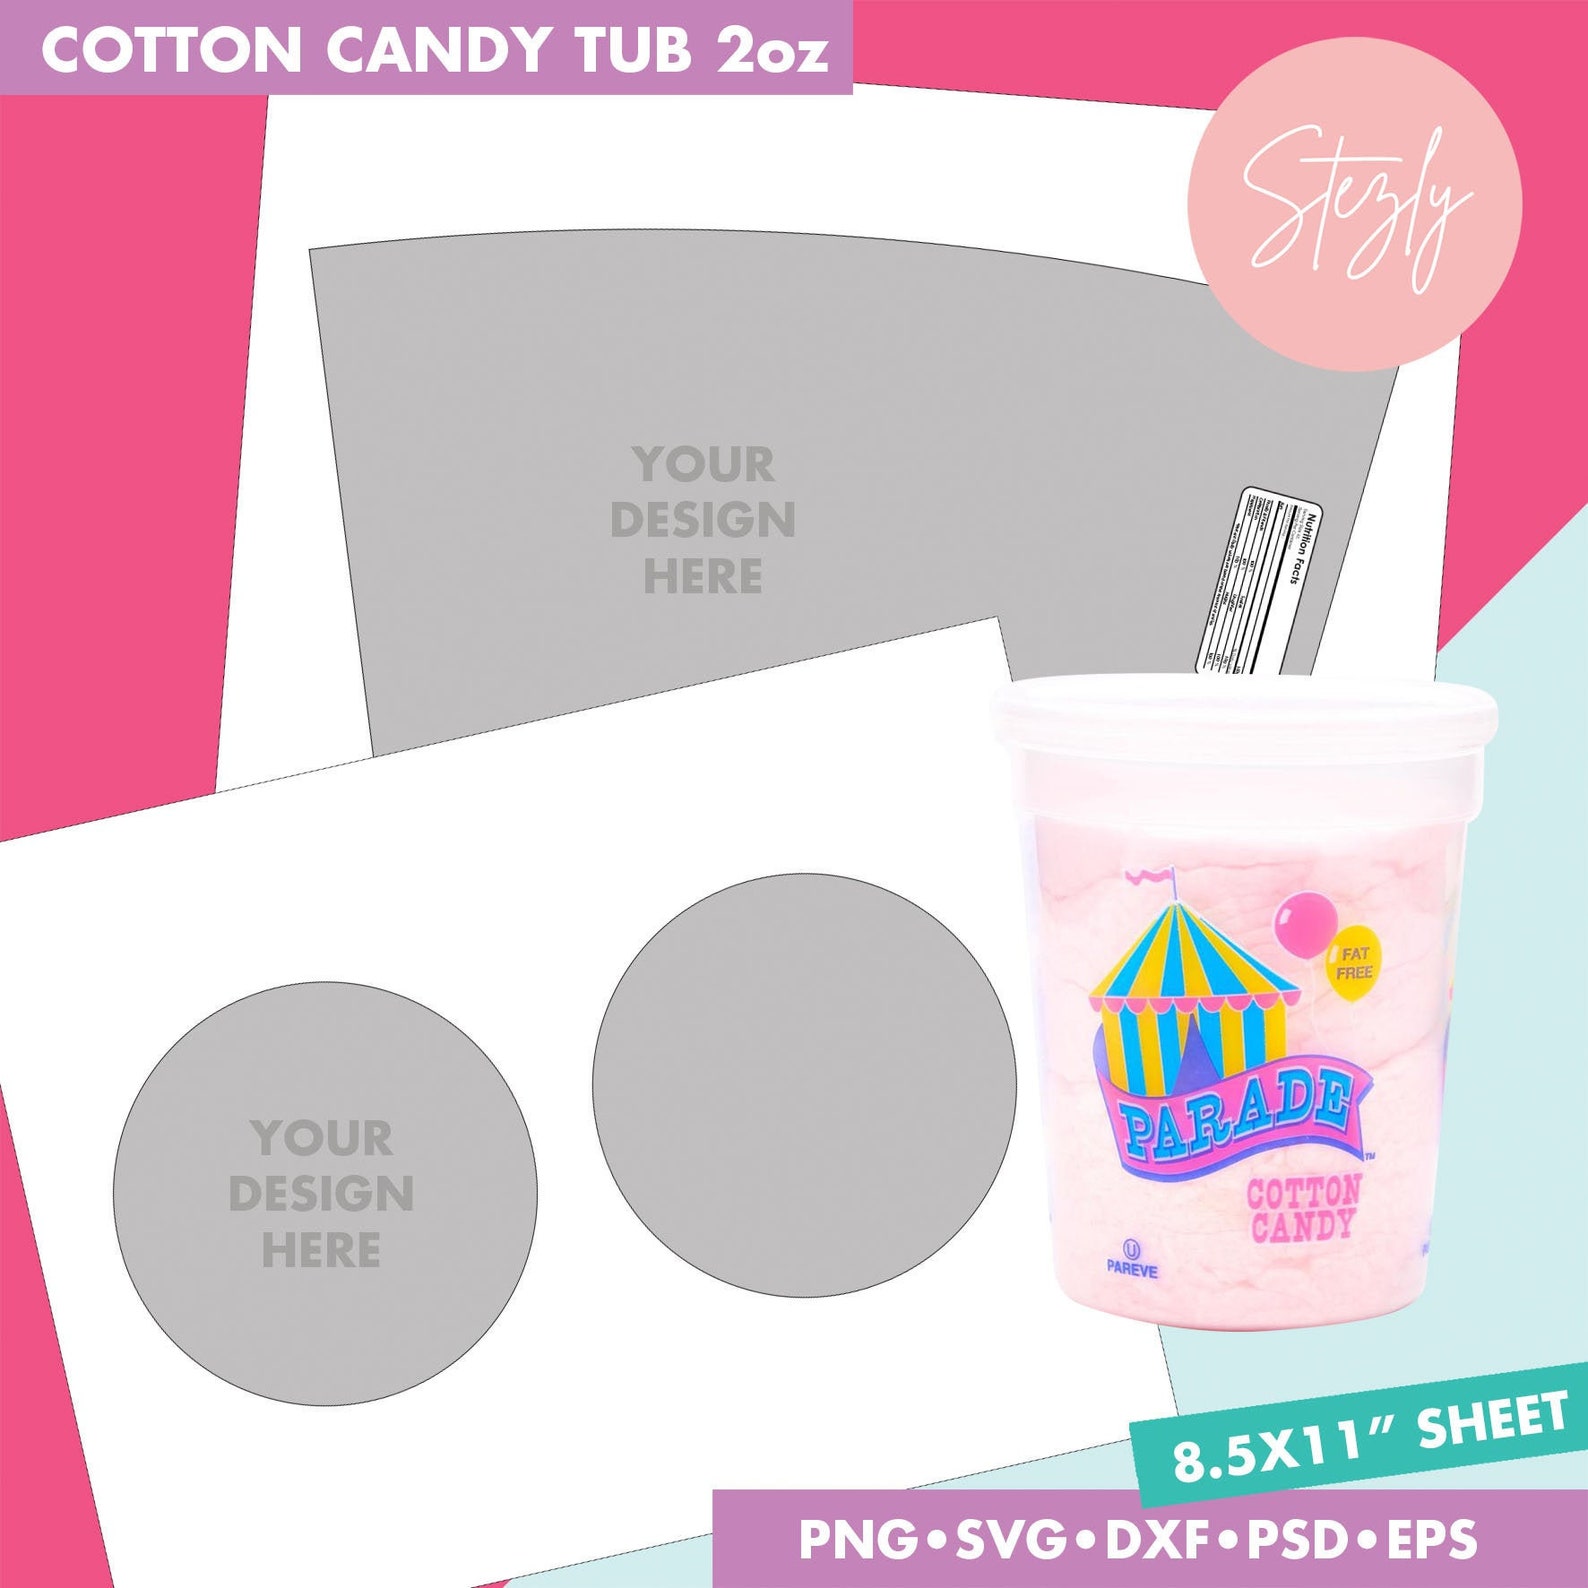 2oz-cotton-candy-tub-label-template-cotton-candy-tub-wrapper-etsy